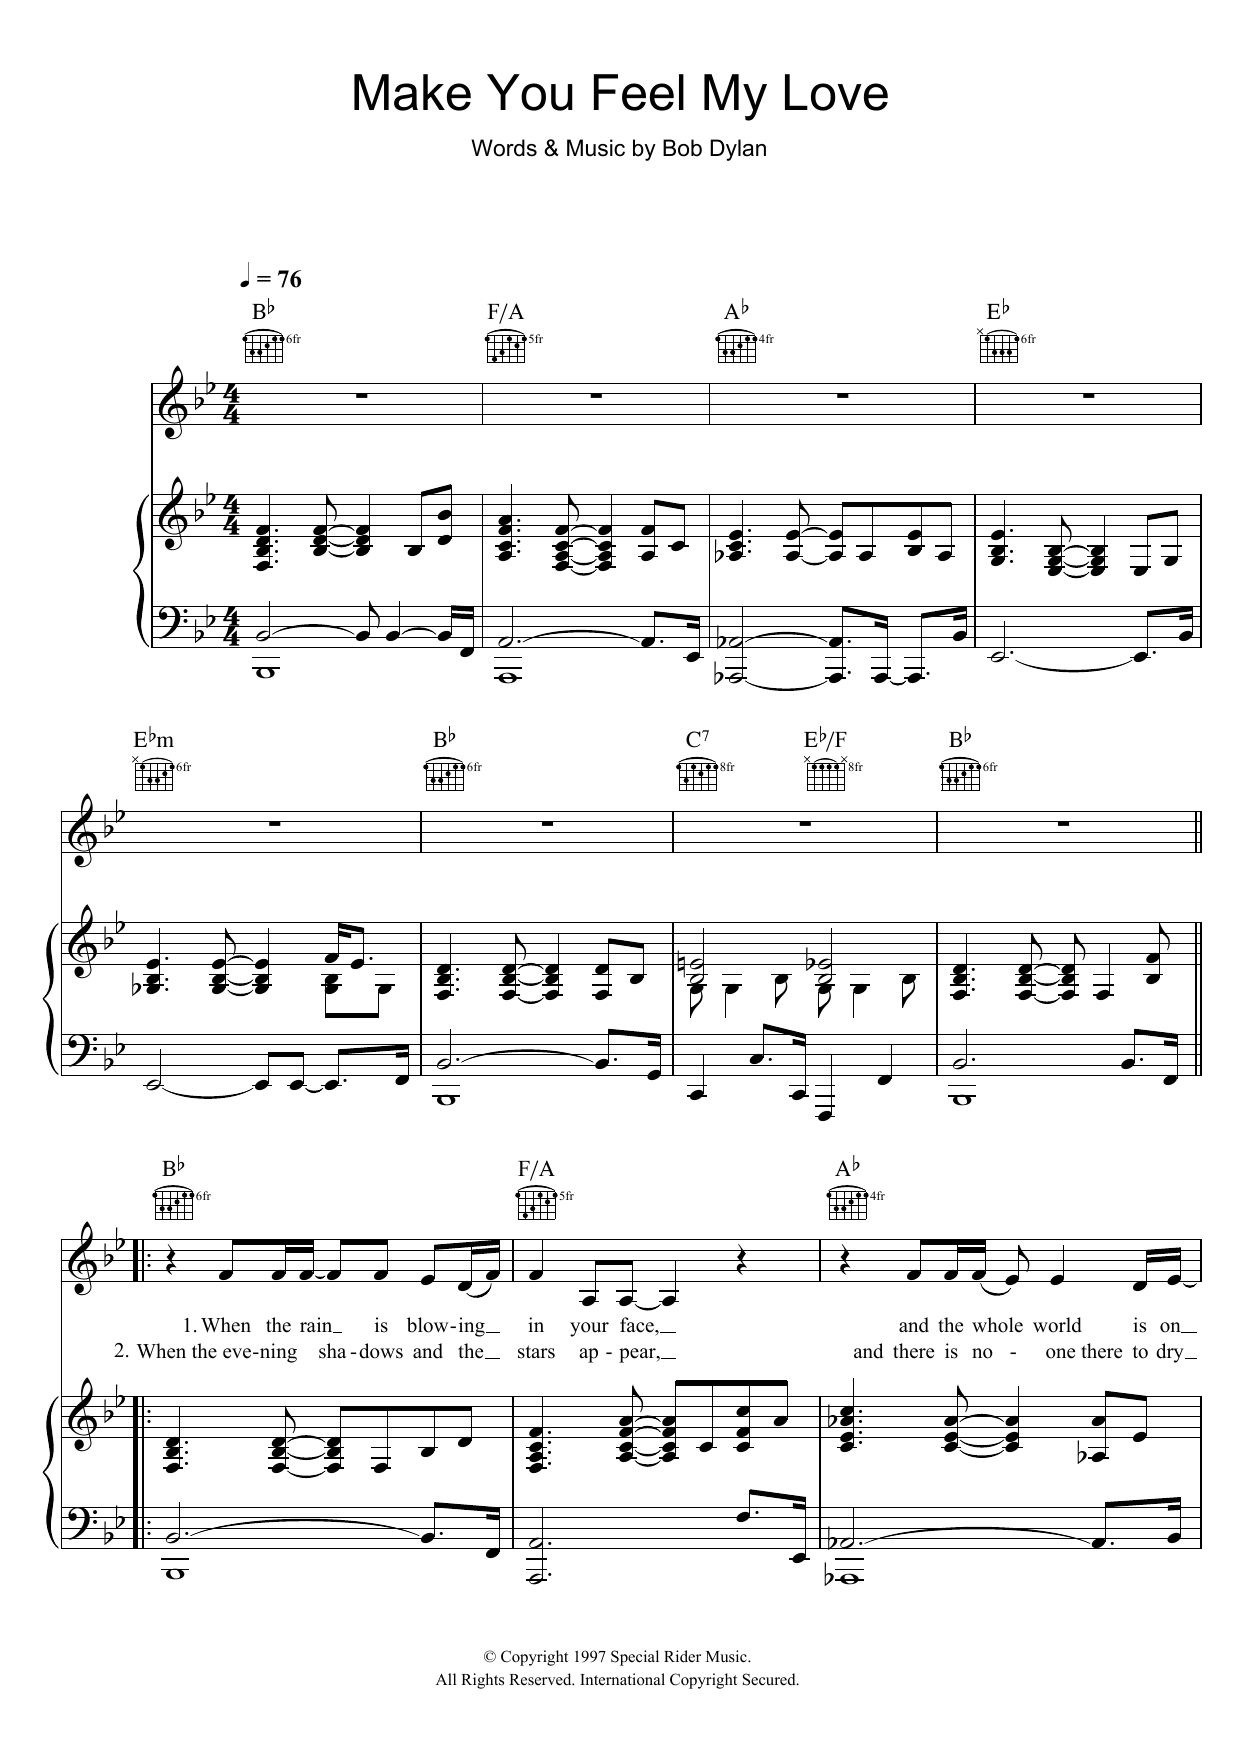 Adele Make You Feel My Love sheet music preview music notes and score for Violin including 2 page(s)